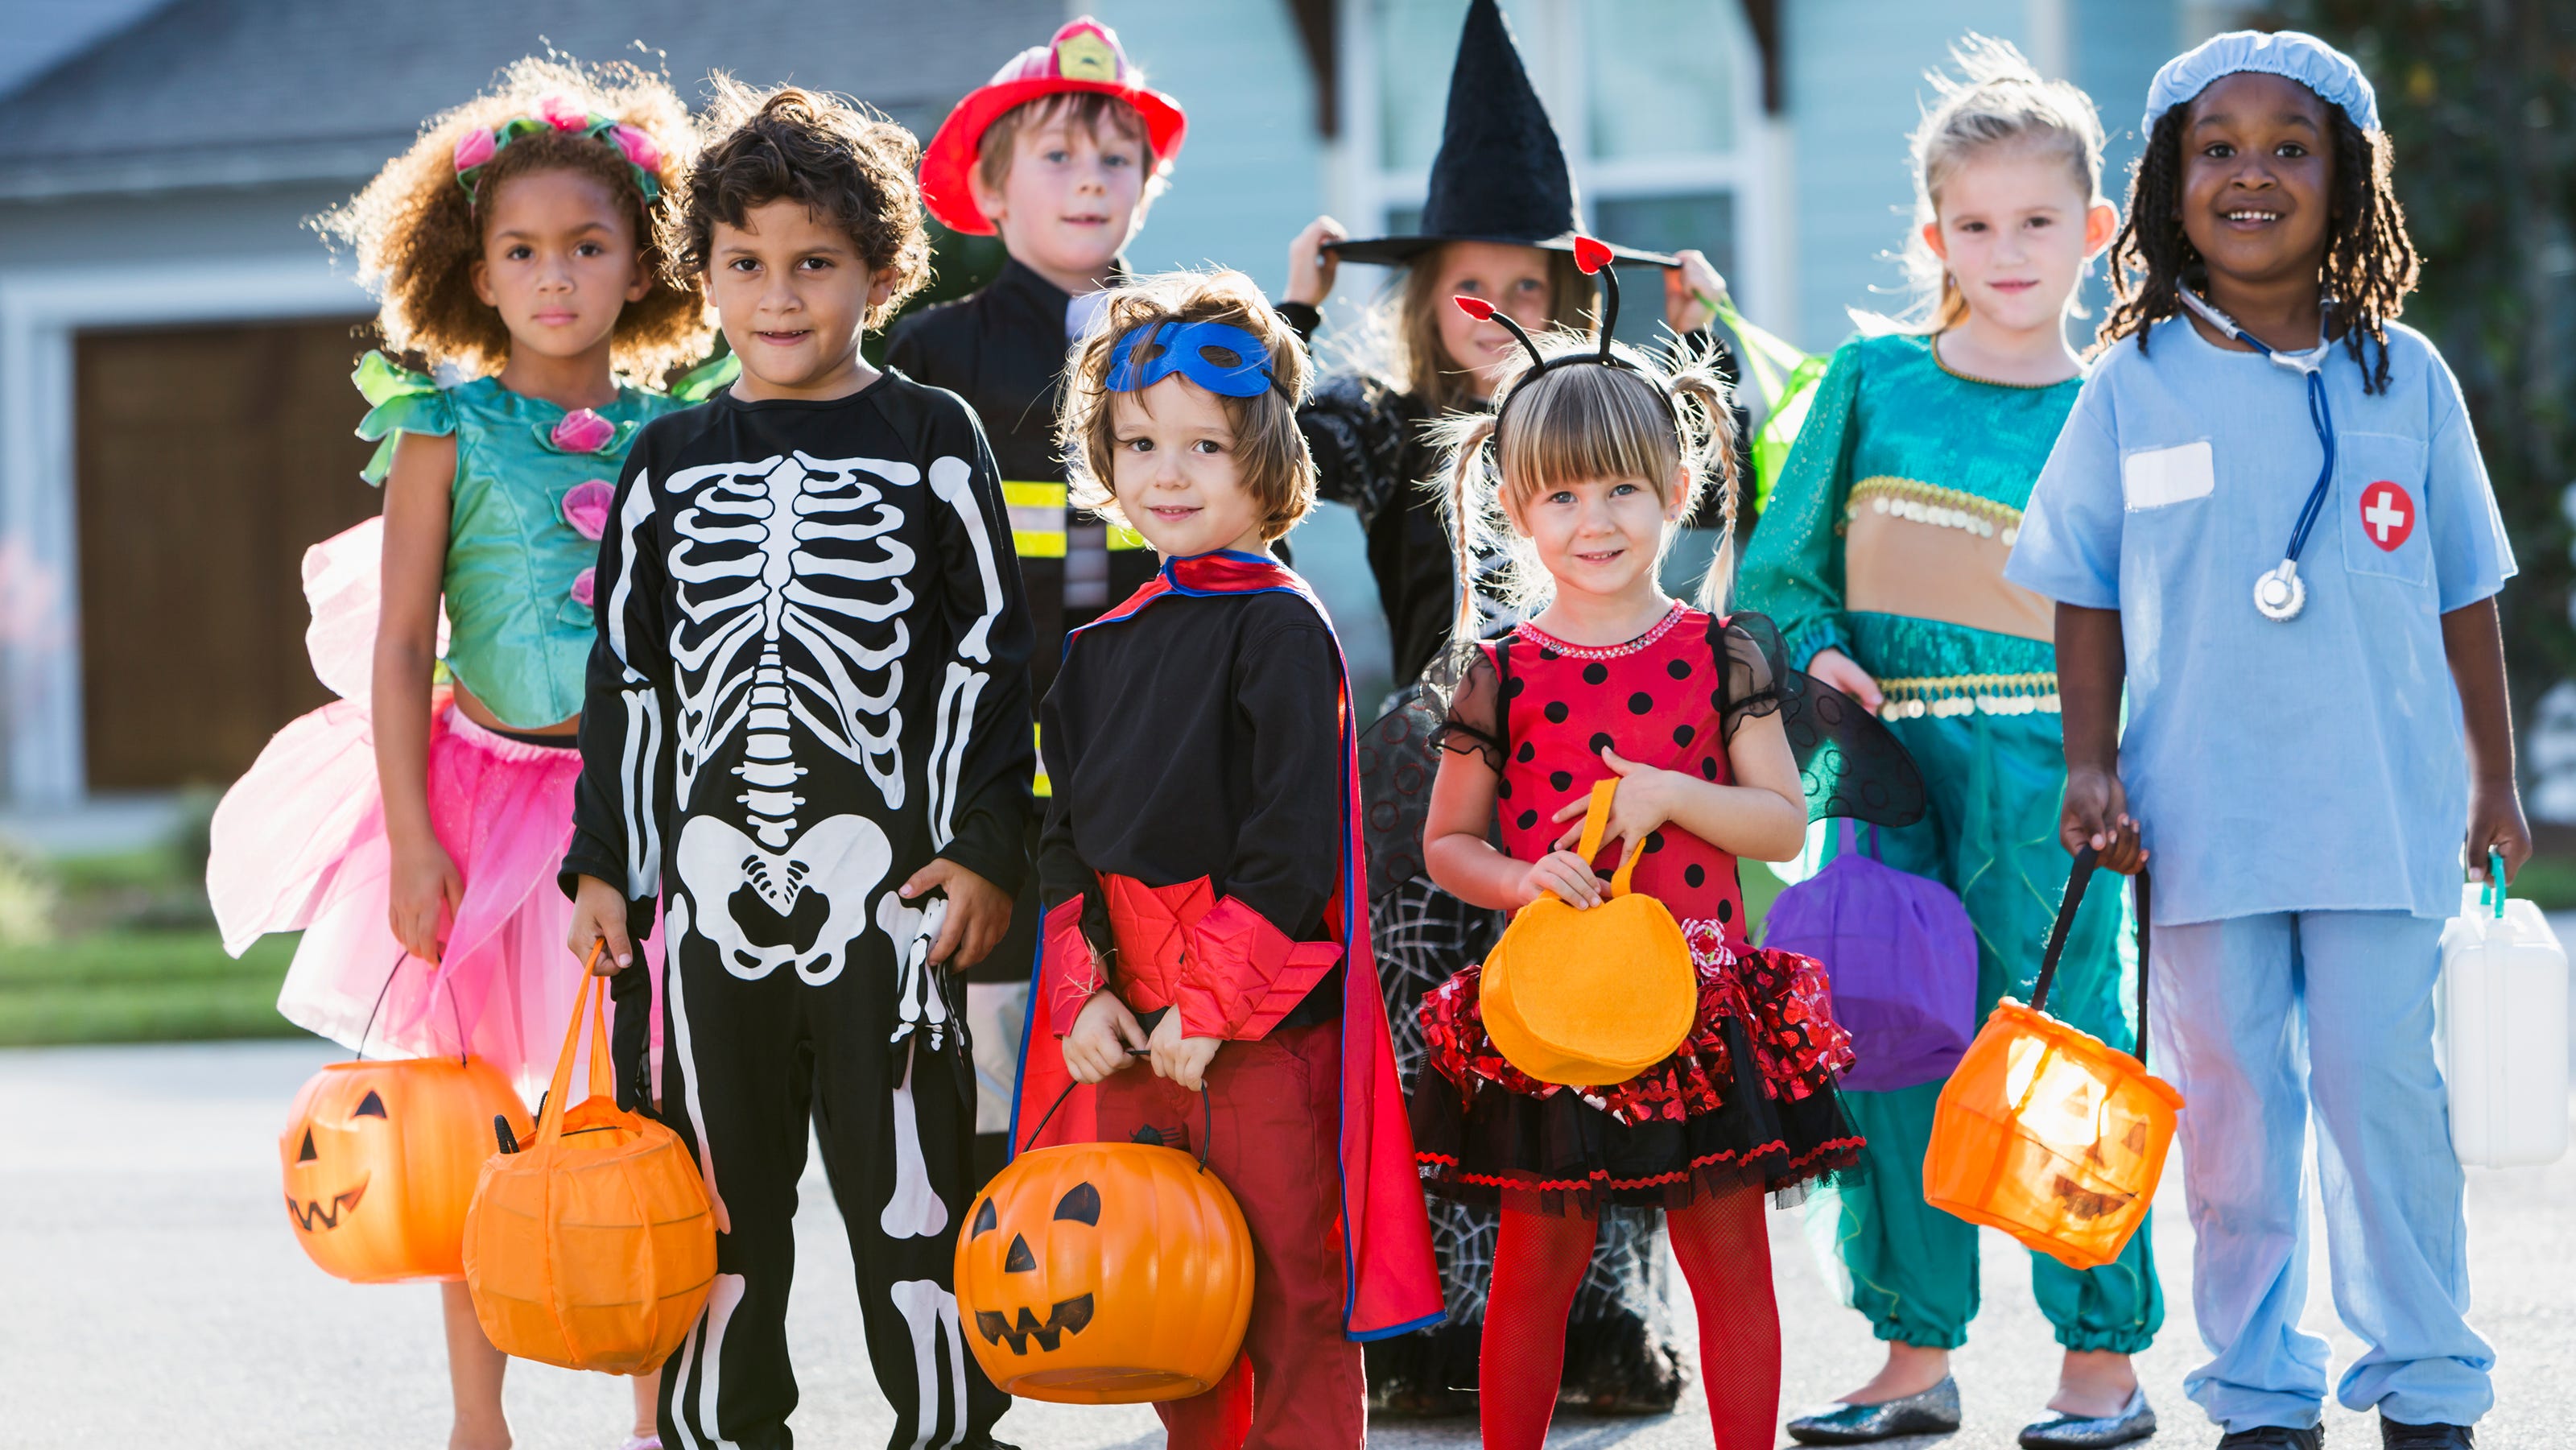 Halloween deals and free food: Here's where to find specials Thursday